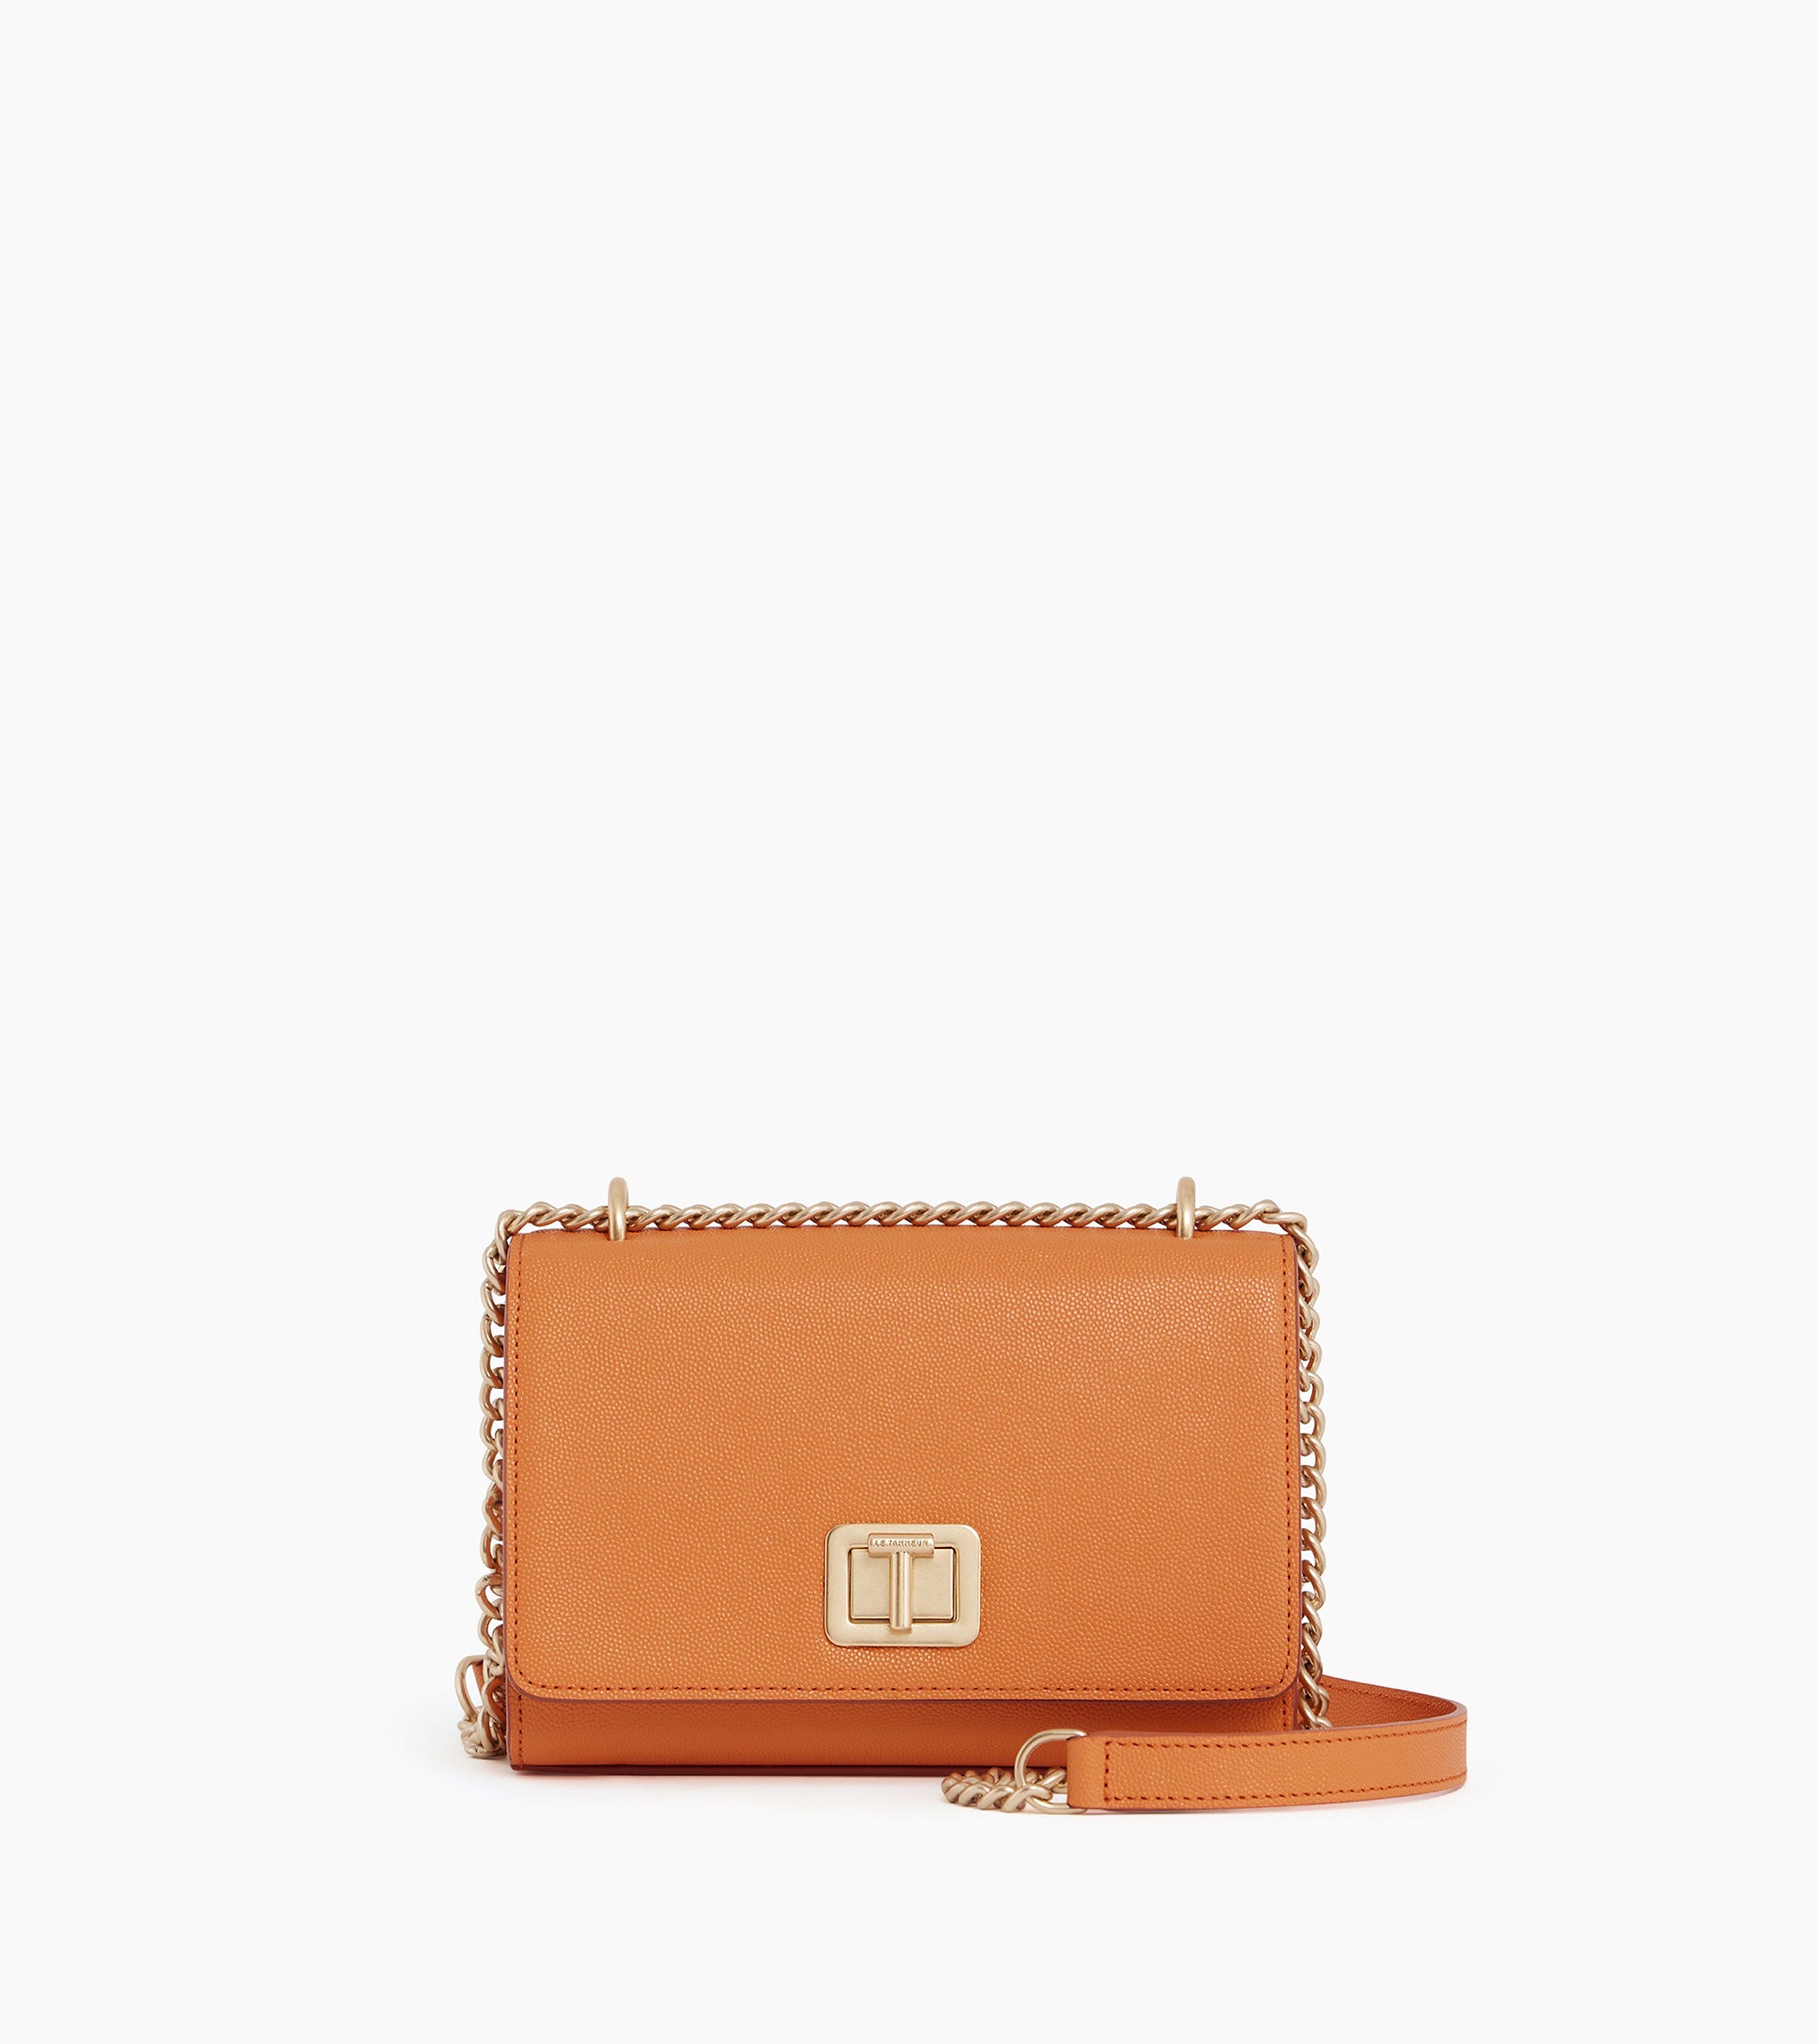 Eva small bag with crossbody strap in caviar grained leather